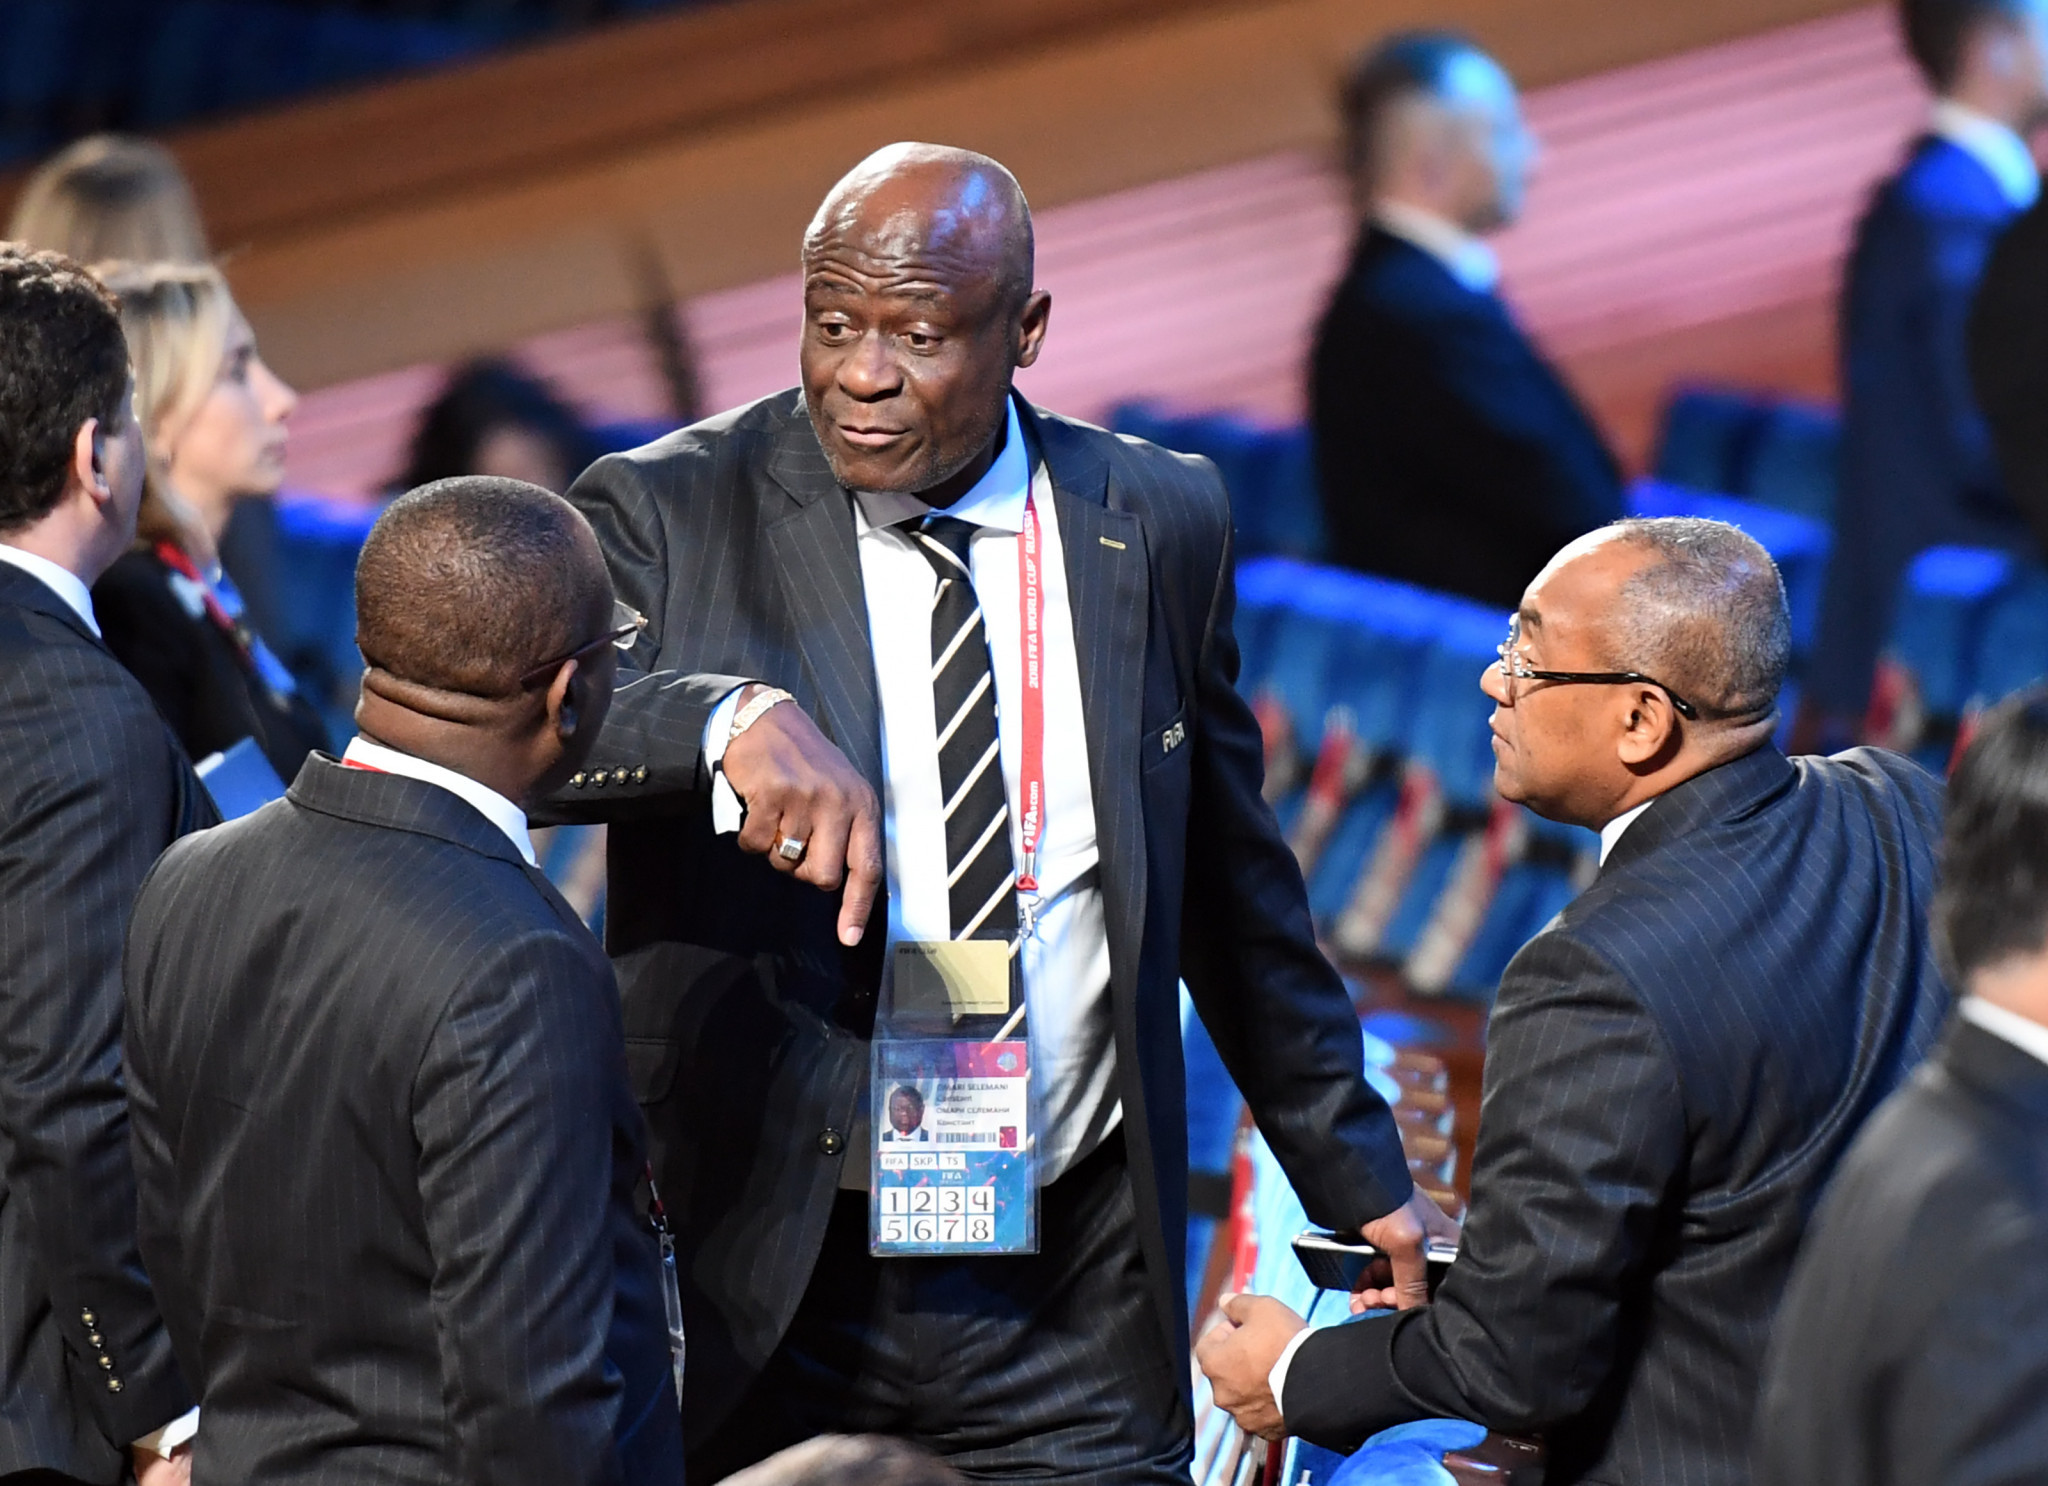 FIFA Council member Constant Omari has accused the DR Congo Sports Minister Papy Nyango of orchestrating his arrest on corruption charges ©Getty Images